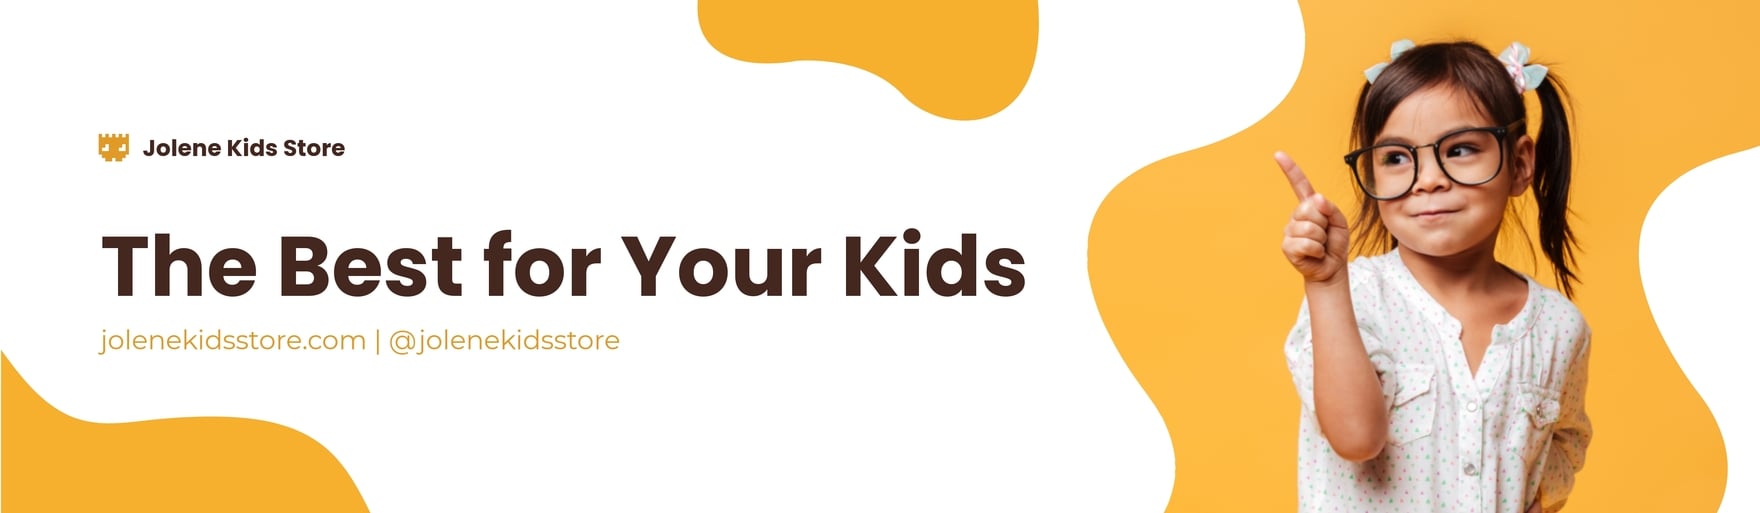 Kids Store Billboard Template in Word, Google Docs, Apple Pages, Publisher